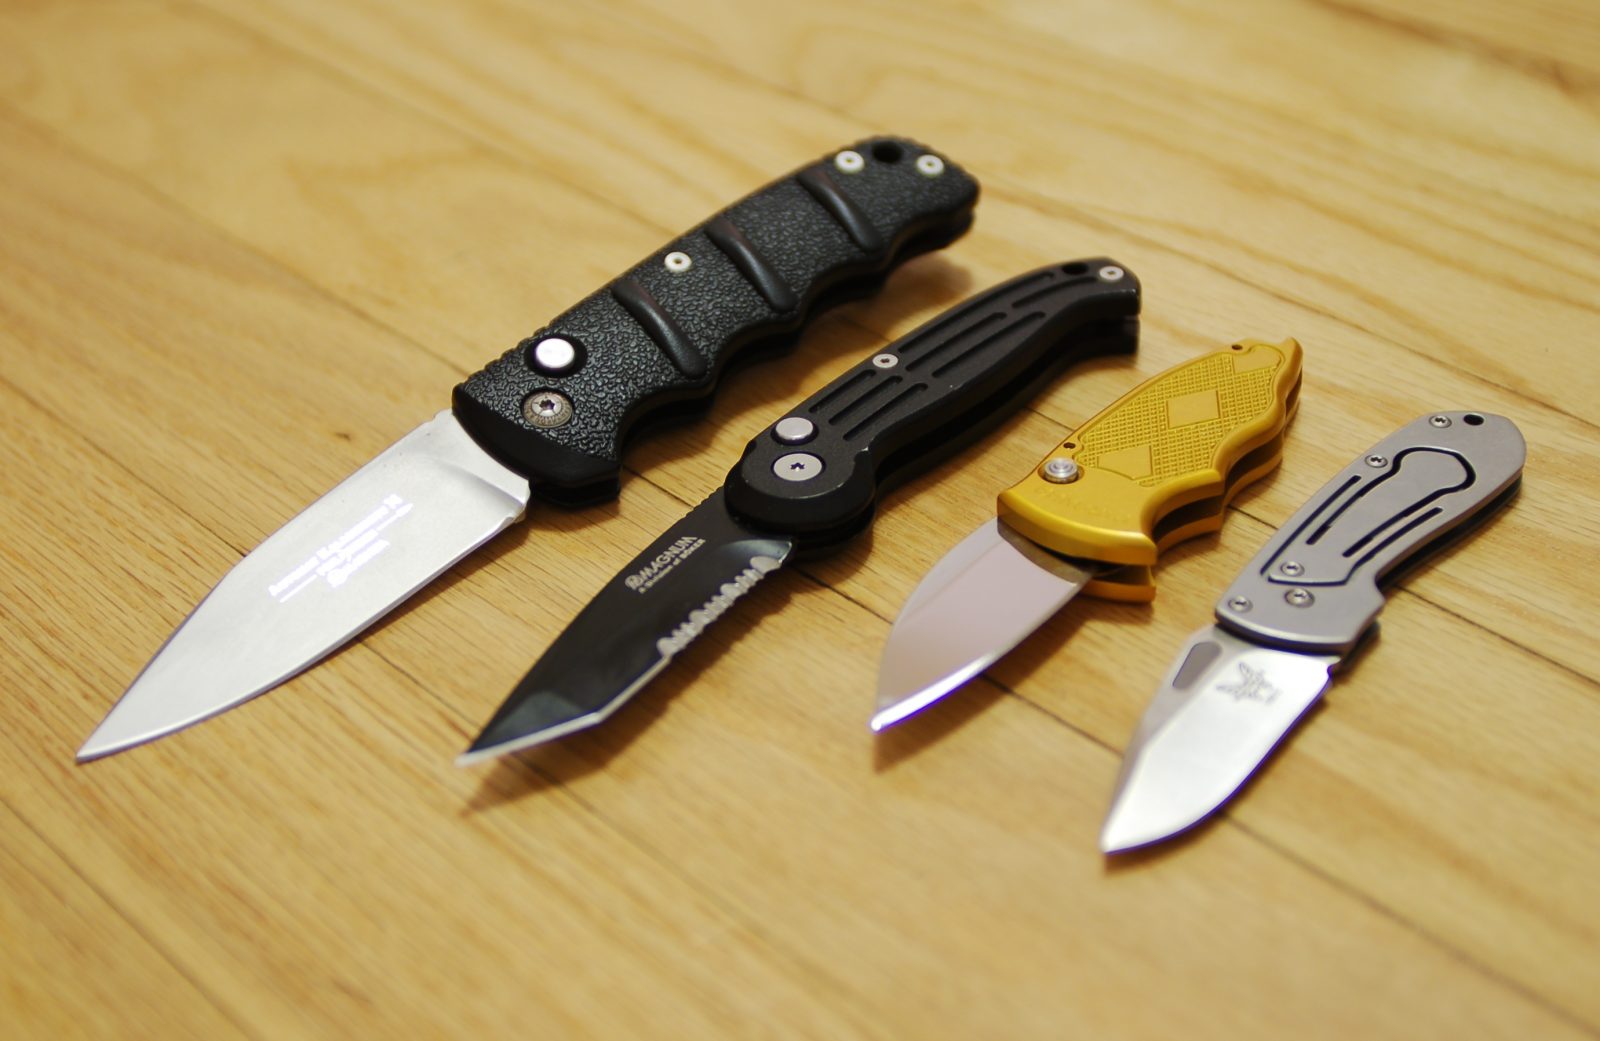 https://exquisiteknives.com/wp-content/uploads/2019/10/Benchmade_knife_collection_2006.jpg